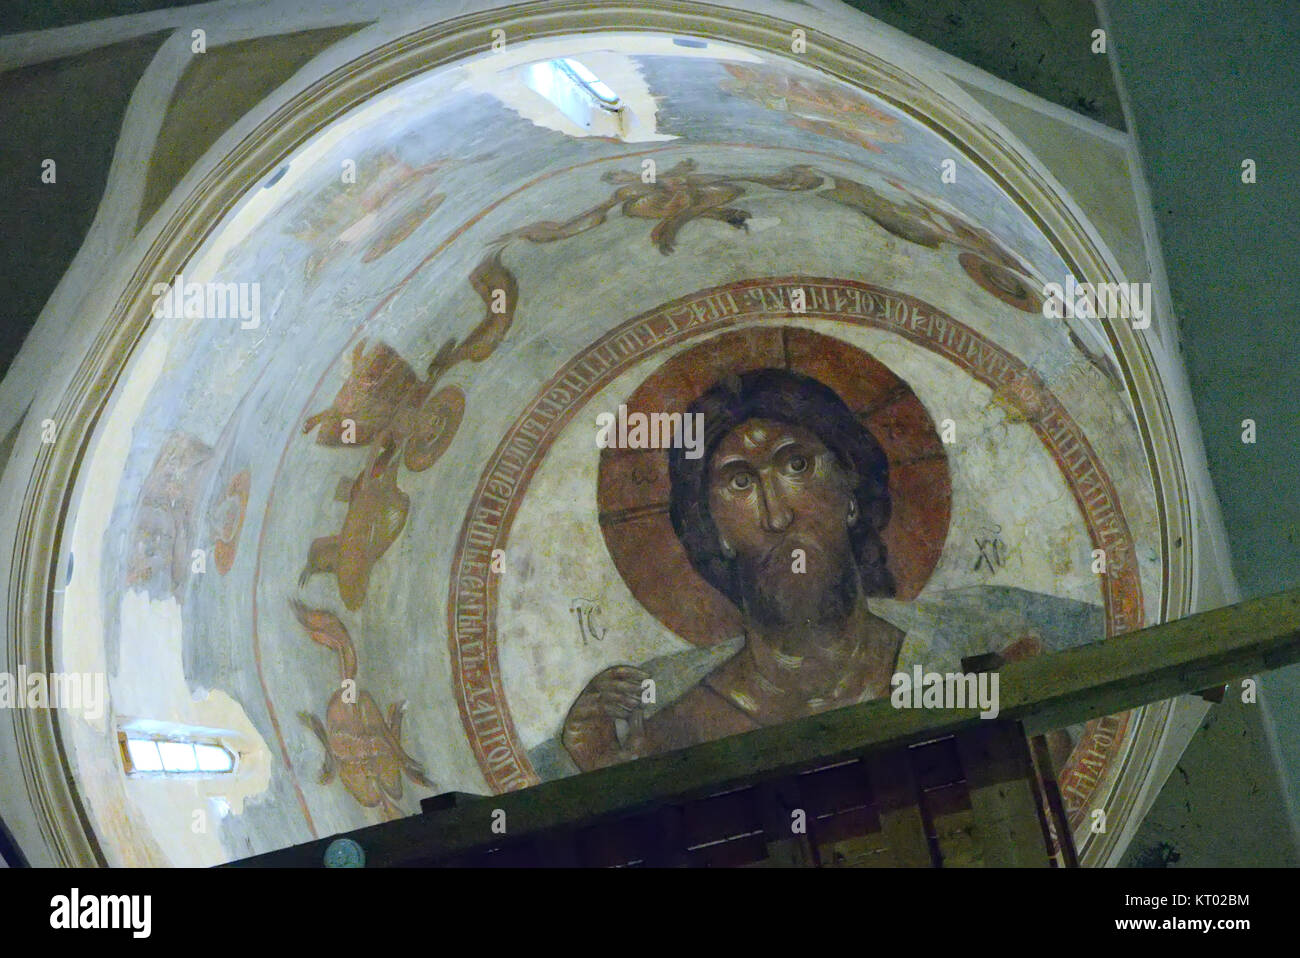 Velikiy Novgorod, Russia - July 16, 2016: The mural of the famous icon painter Theophanes the Greek Christ Pantocrator, located in the church of the T Stock Photo